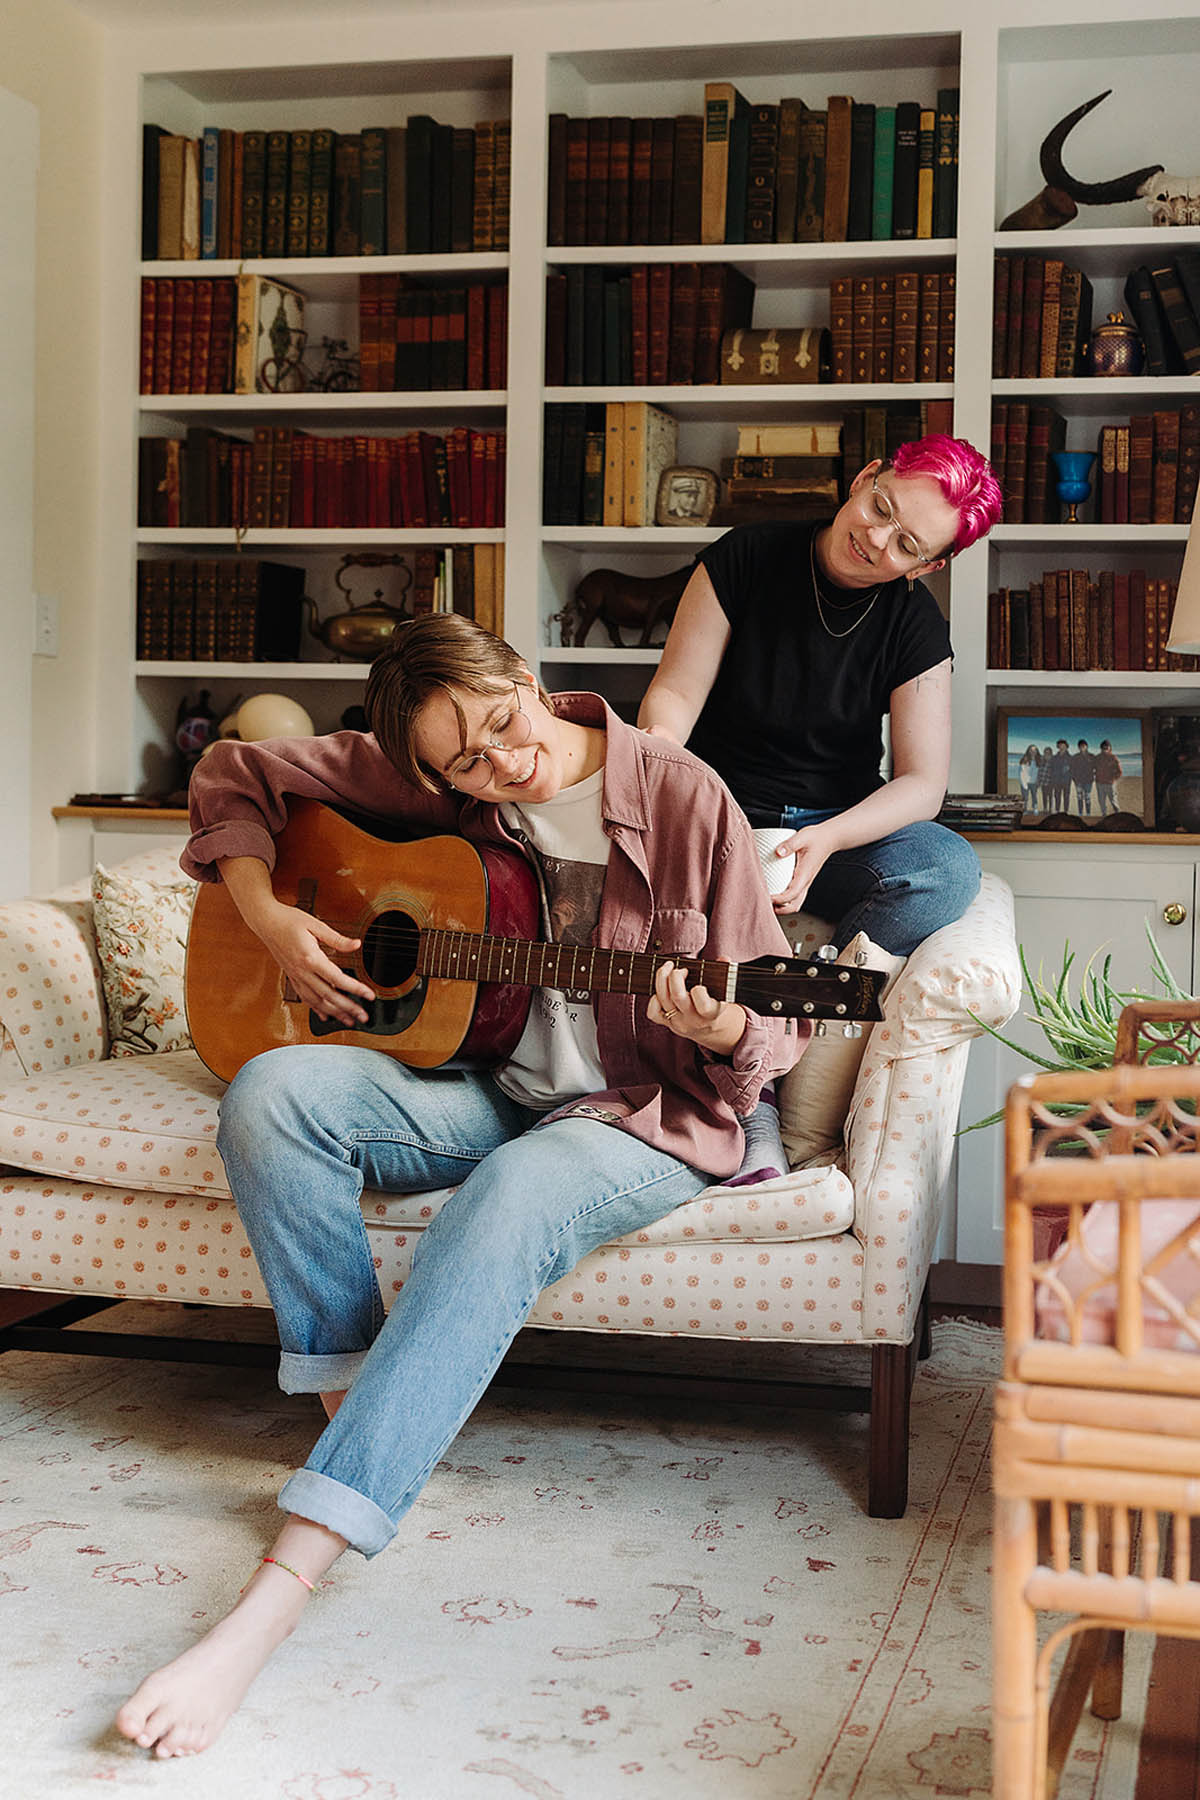 Two white people sit on a yellow sofa posing for documentary-style engagement photos. One person has pink hair and is wearing a black shirt, and the other is a brunette wearing blue jeans and playing a guitar.